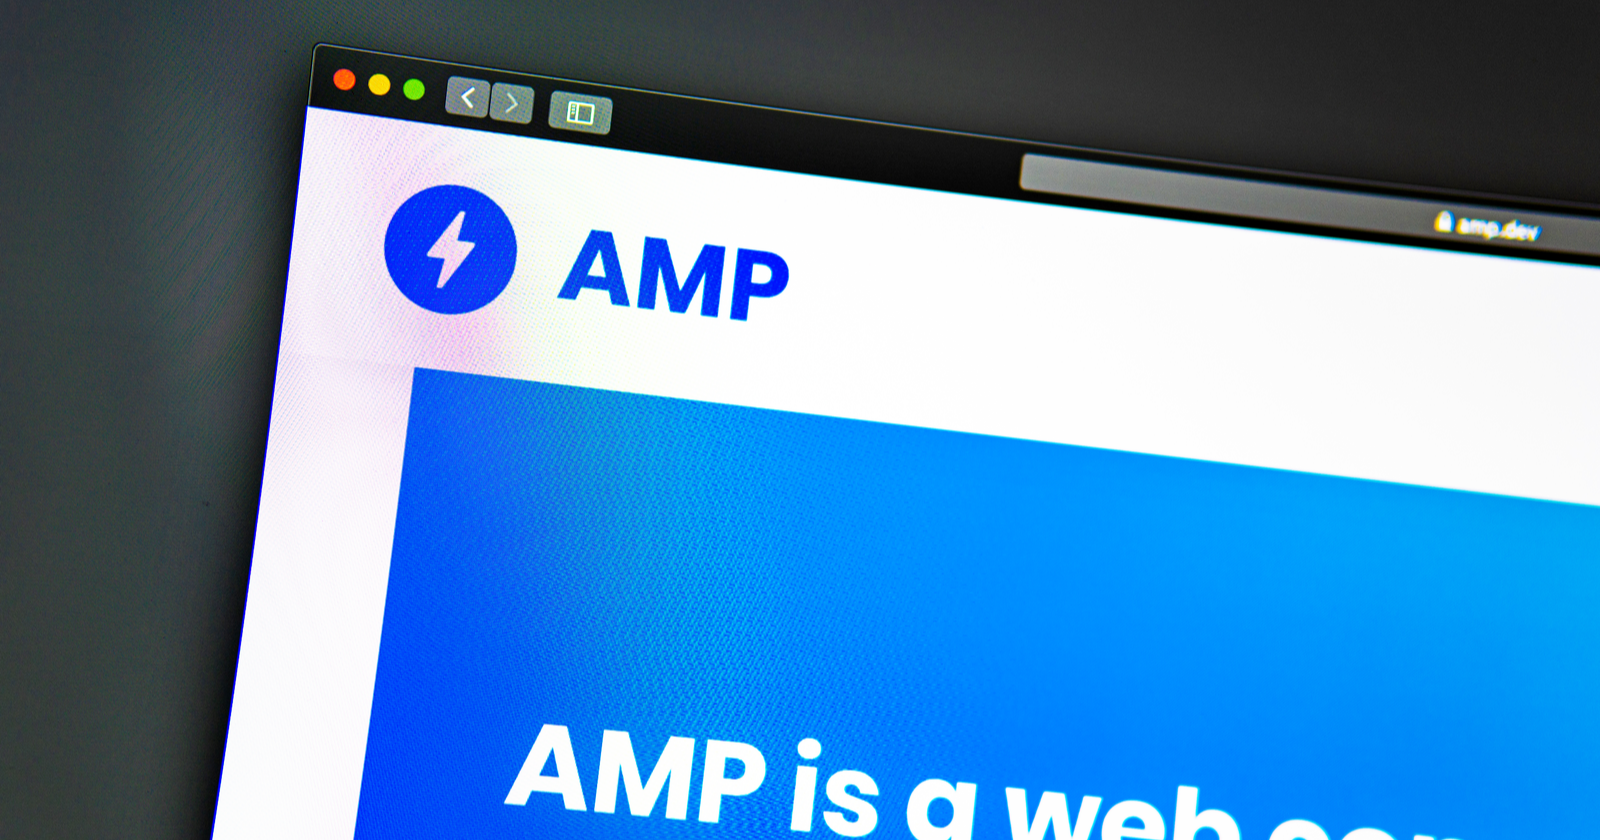 Best Amp Wordpress Plugins for Speed, Search & Tracking